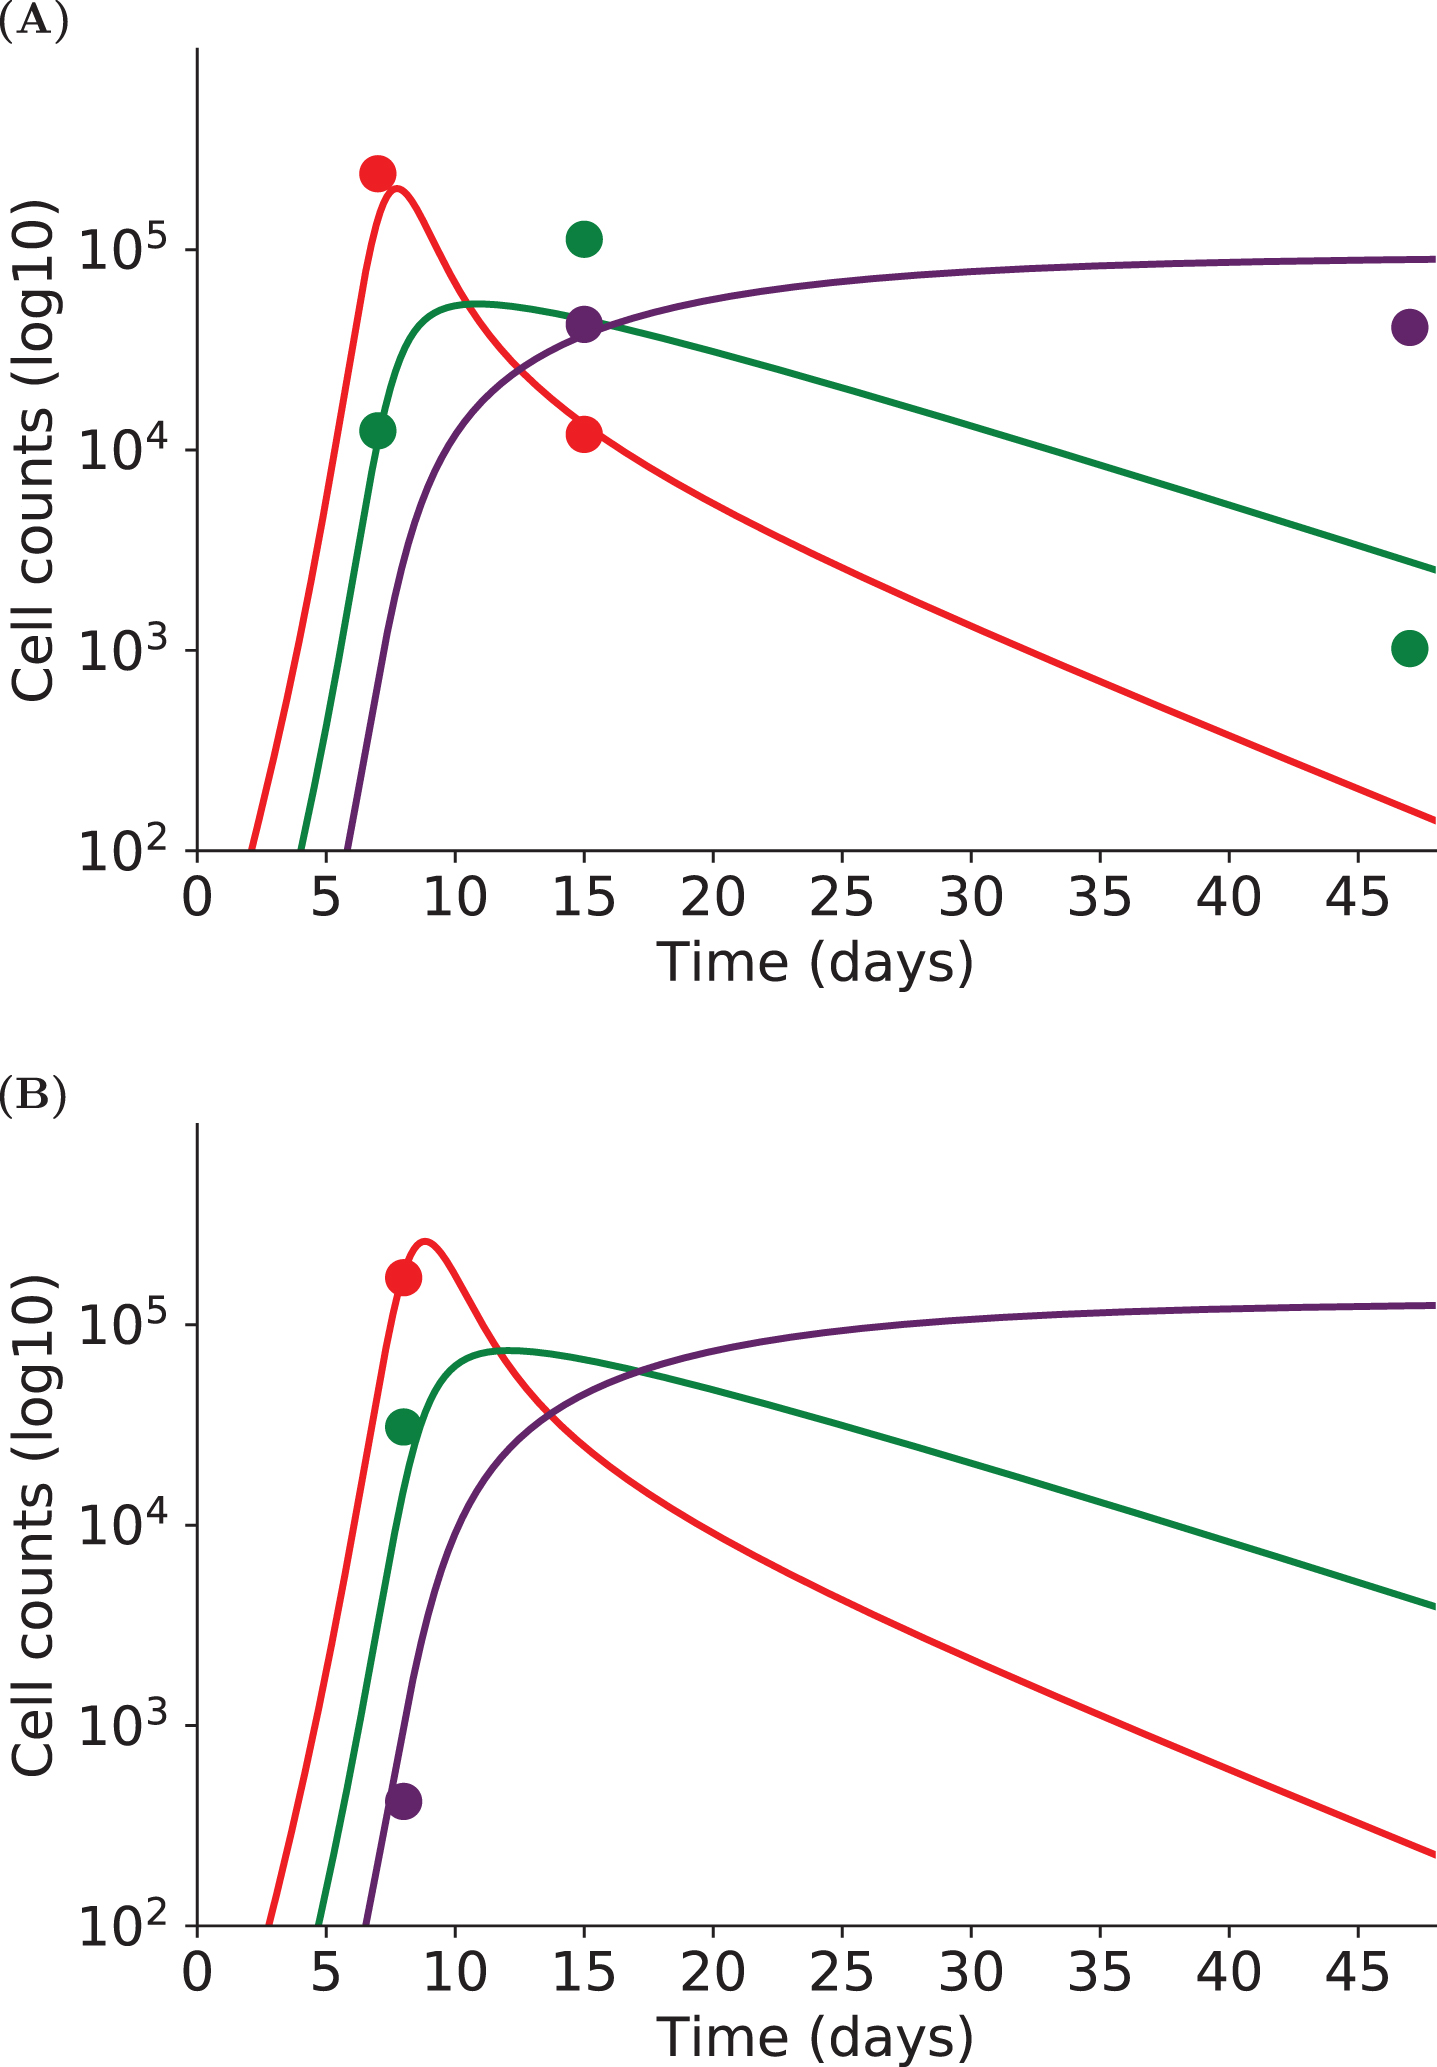 The dynamics of three subpopulations (early effector - red, late effector - green, memory - purple) are simulated with System (2) for two individuals. Experimental measurements are represented by dots, simulations of the model by straight lines. (A) Individual cell counts have been measured on days 7, 15 and 47pi. (B) Individual cell counts have been measured on day 8pi only. Although each individual is not characterized by enough experimental measurements to allow parameter estimation on single individuals, nonlinear mixed effects models provide individual fits by considering a population approach.